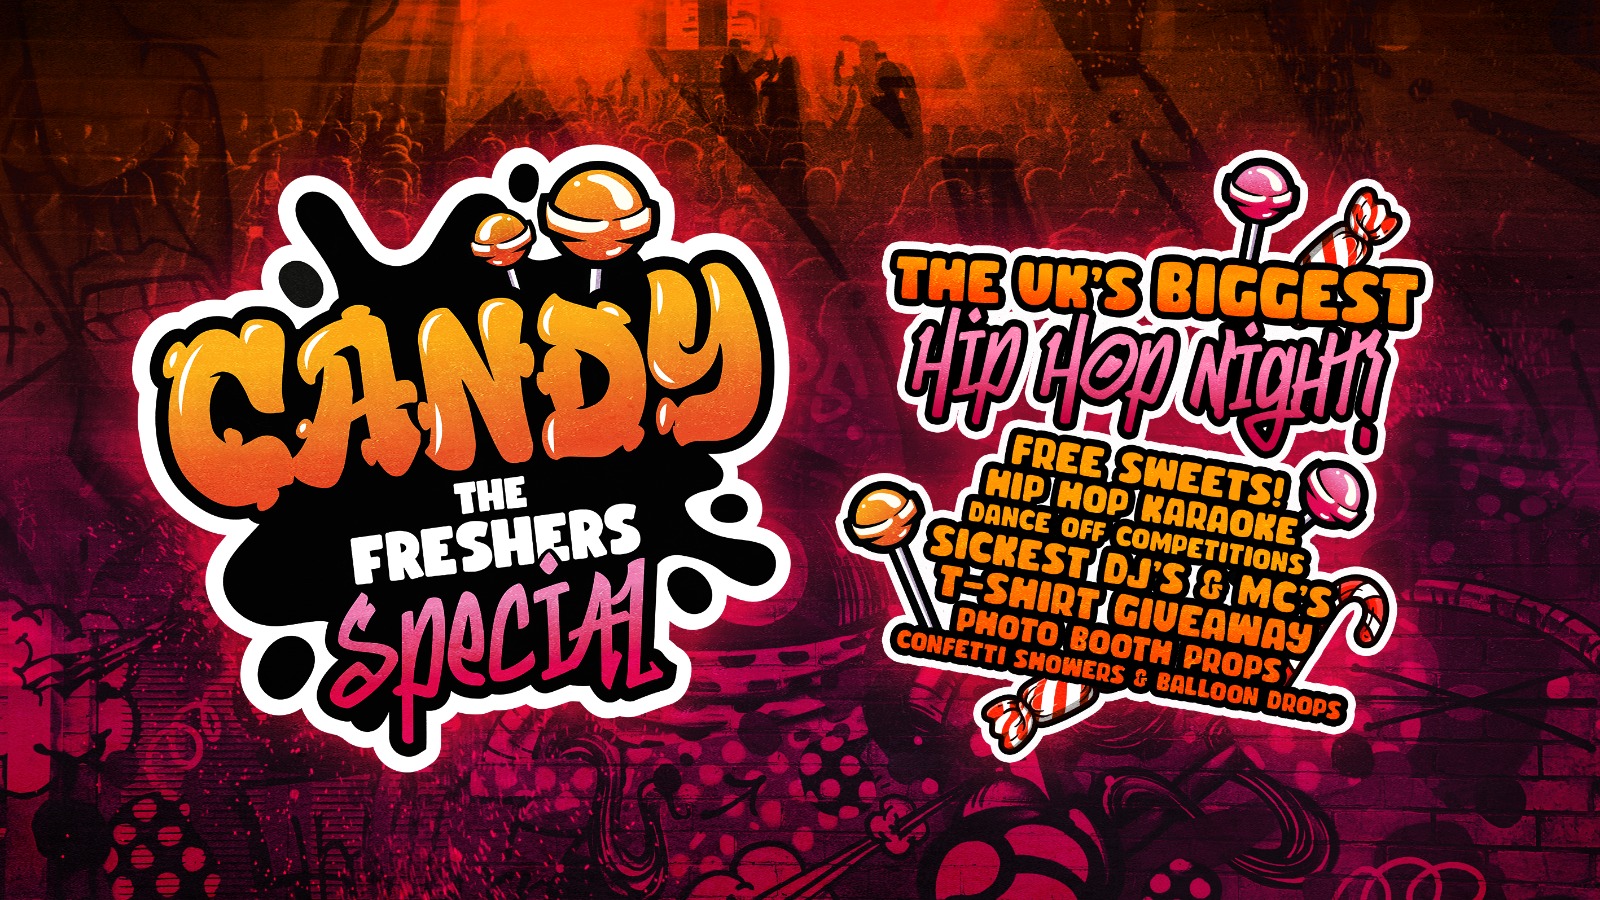 Candy The Freshers Special The Uks Biggest Hip Hop Night Sheffield At Tba Sheffield On 23rd Sep 21 Fatsoma